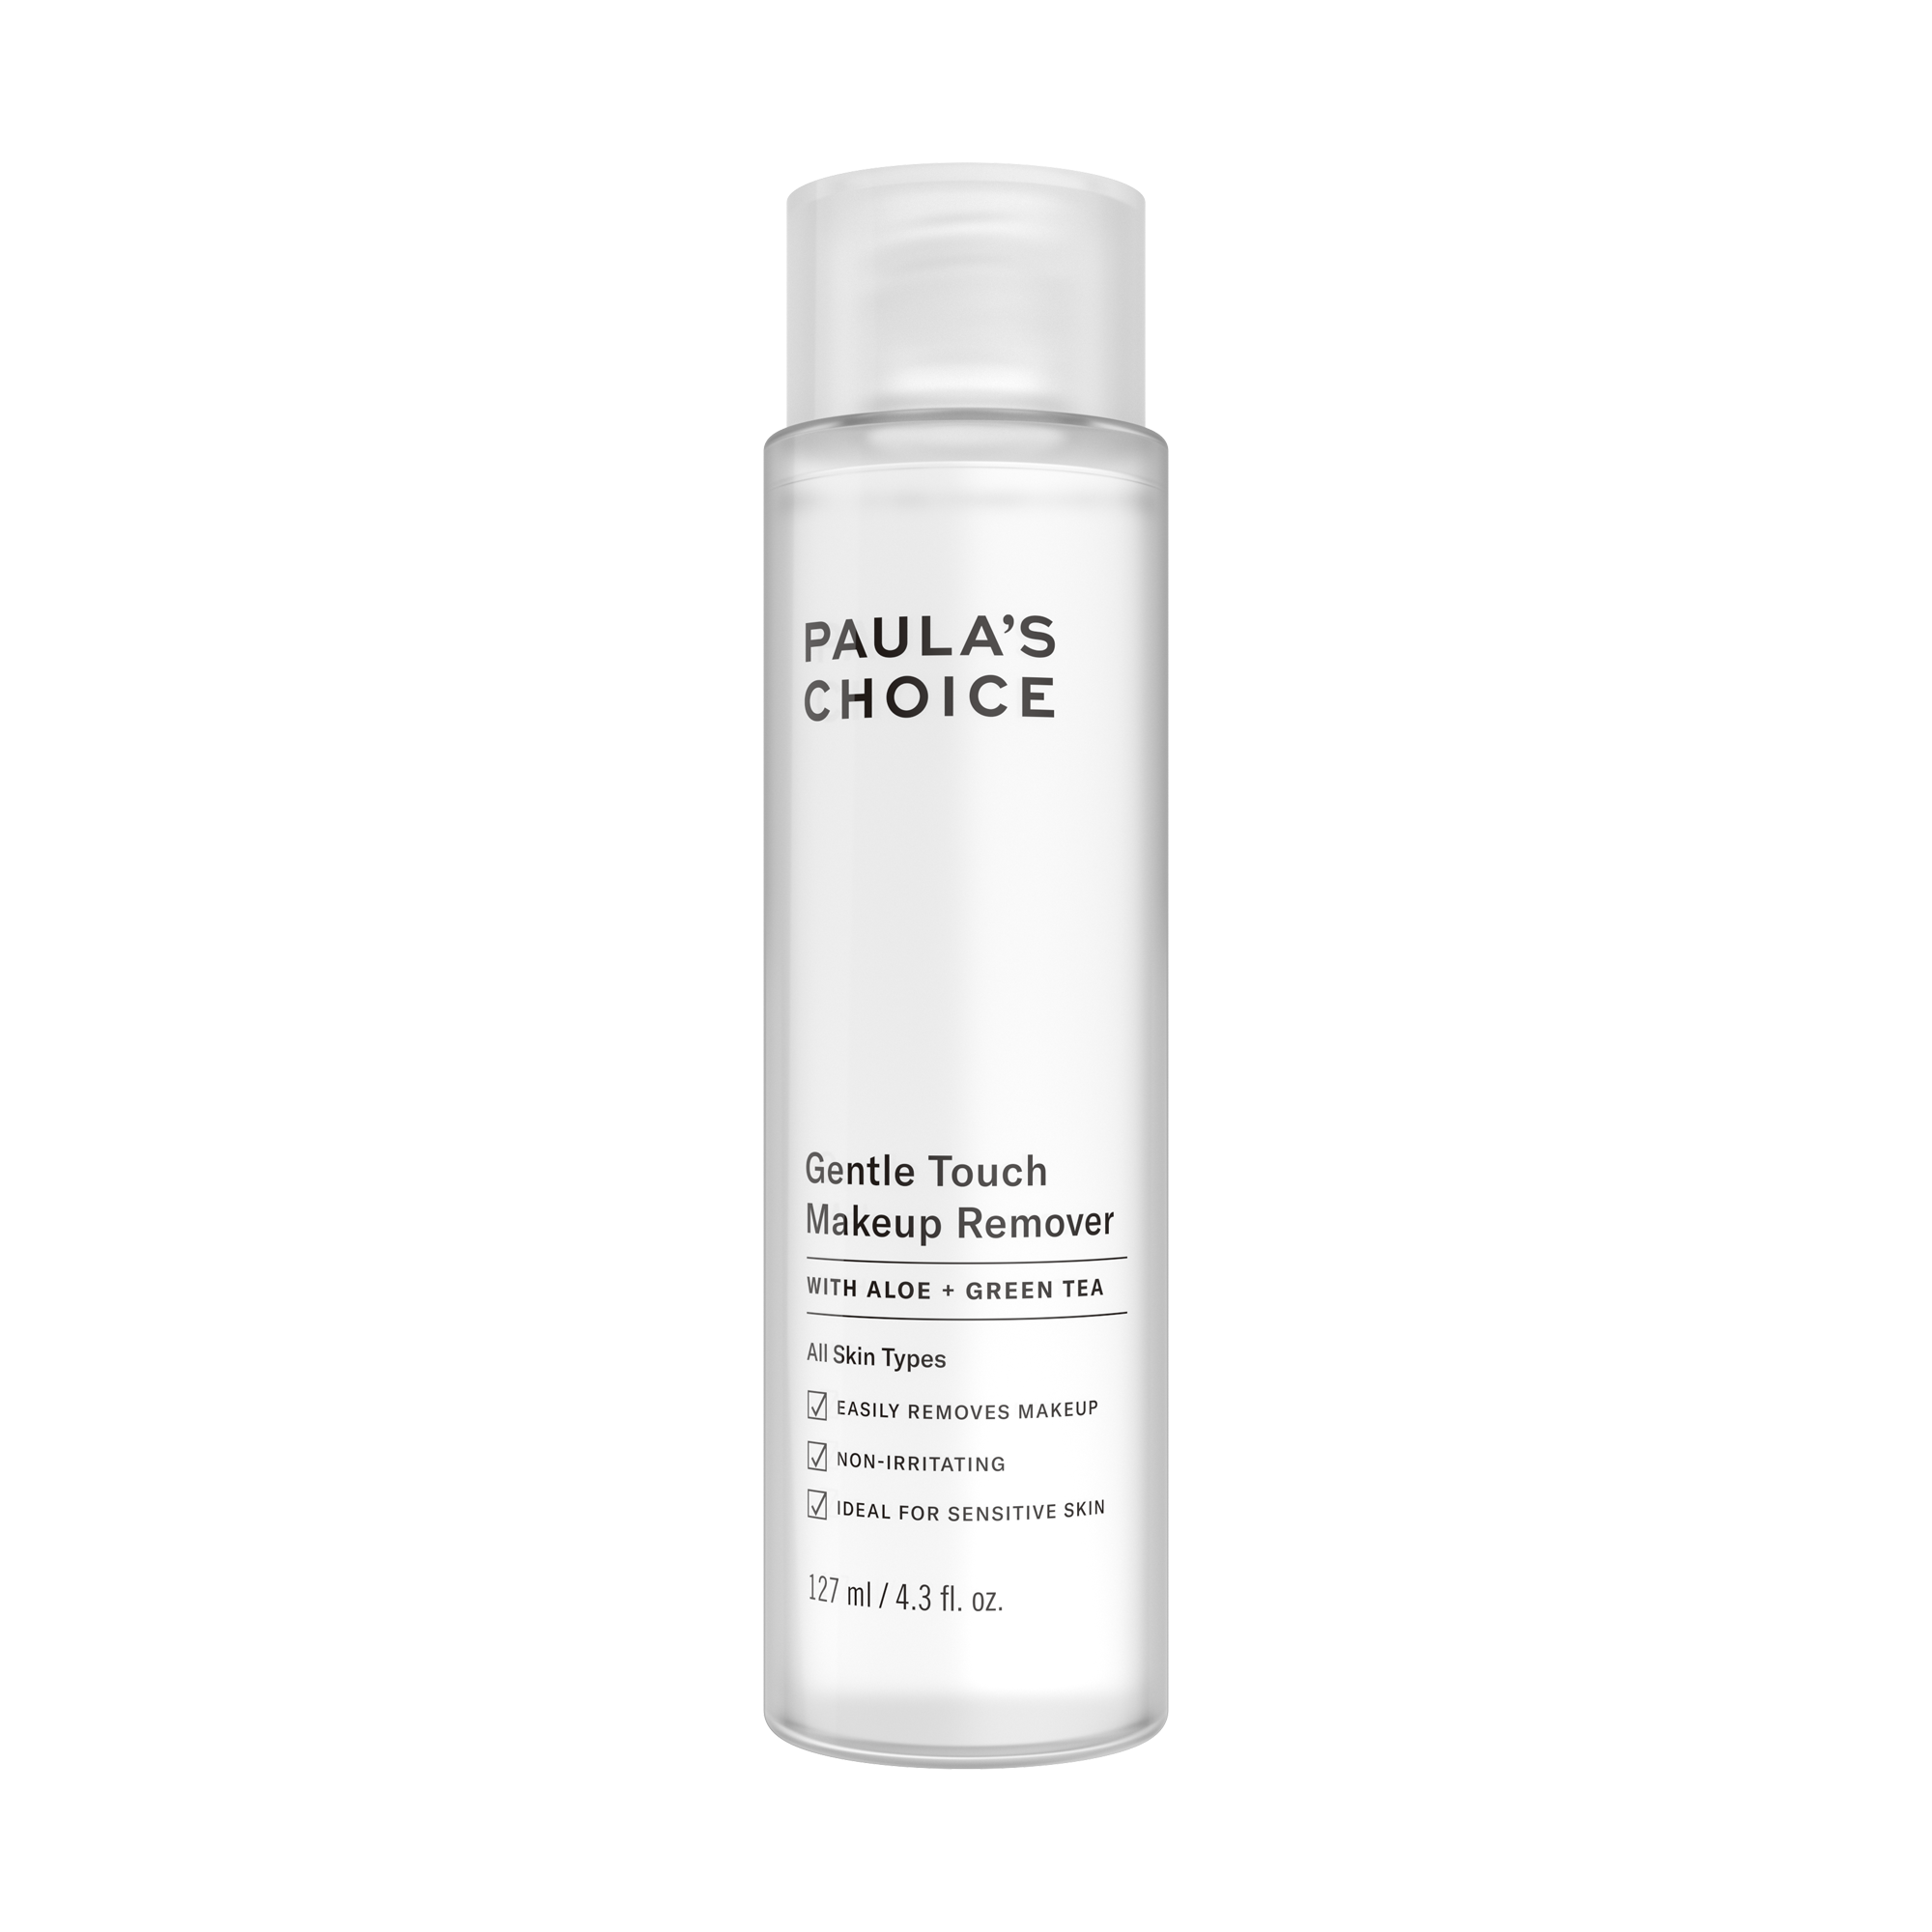 Paula's Choice Gentle Touch Makeup Remover - 4.3 oz